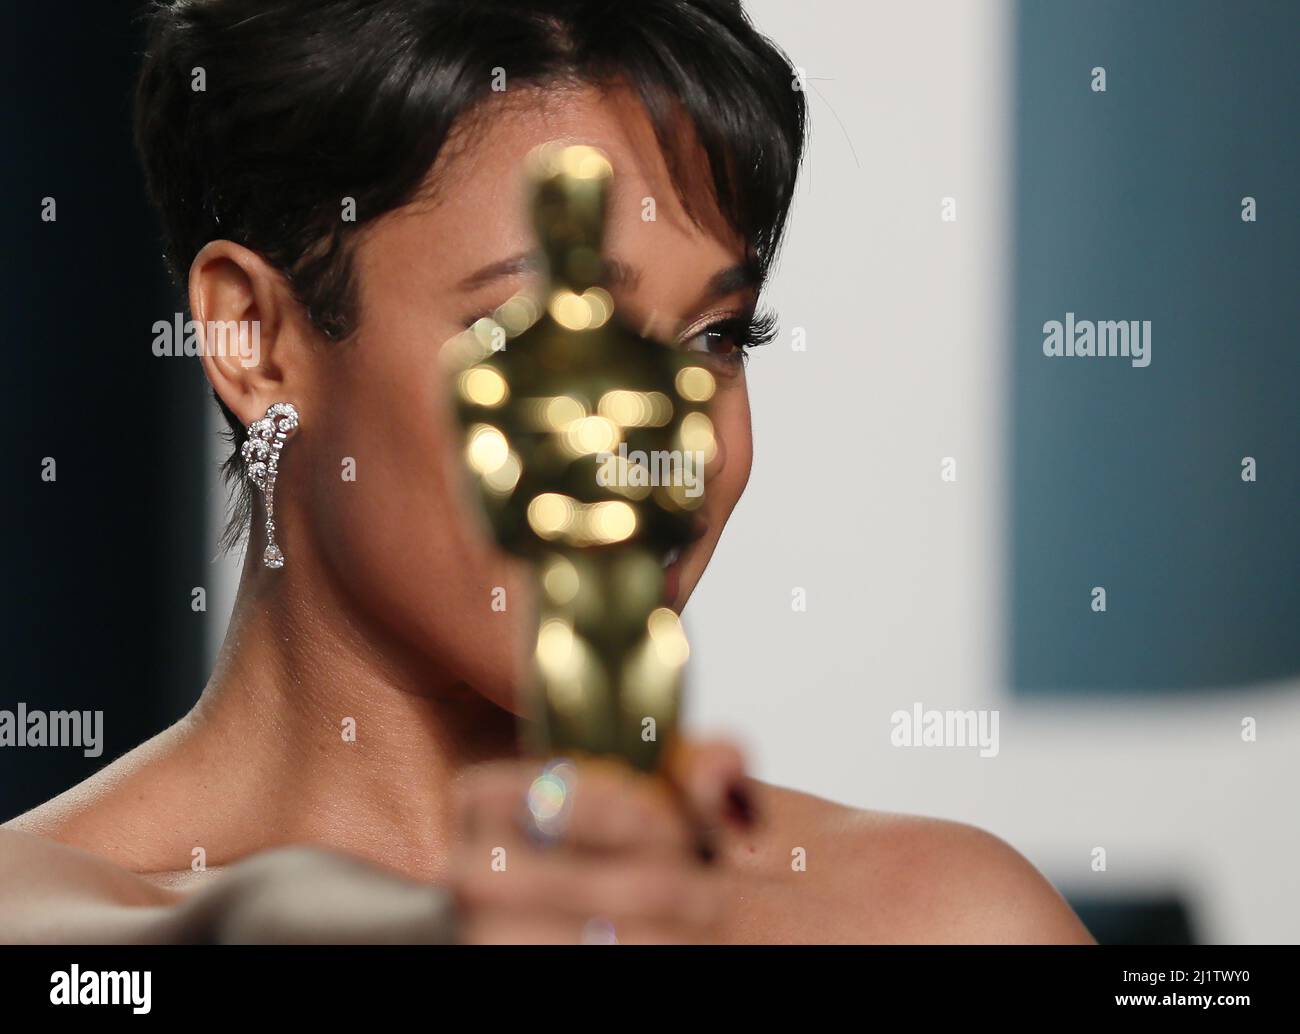 Ariana DeBose holds her Oscar while posing for pictures during her arrival at the Vanity Fair Oscar party during the 94th Academy Awards in Beverly Hills, California, U.S., March 27, 2022. REUTERS/Danny Moloshok Stock Photo